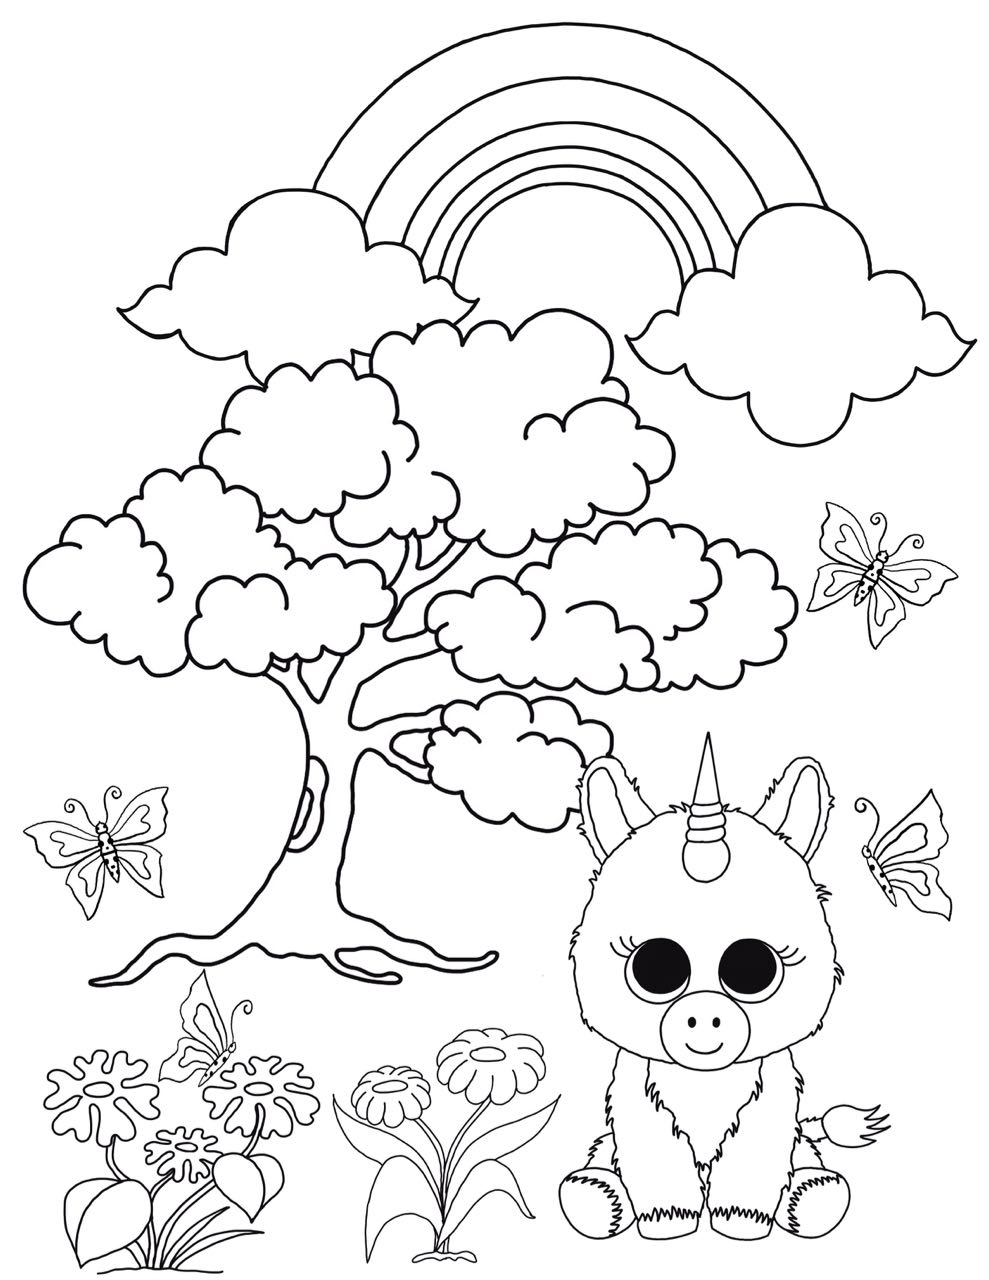 Free Beanie Boo Coloring Pages Download ...